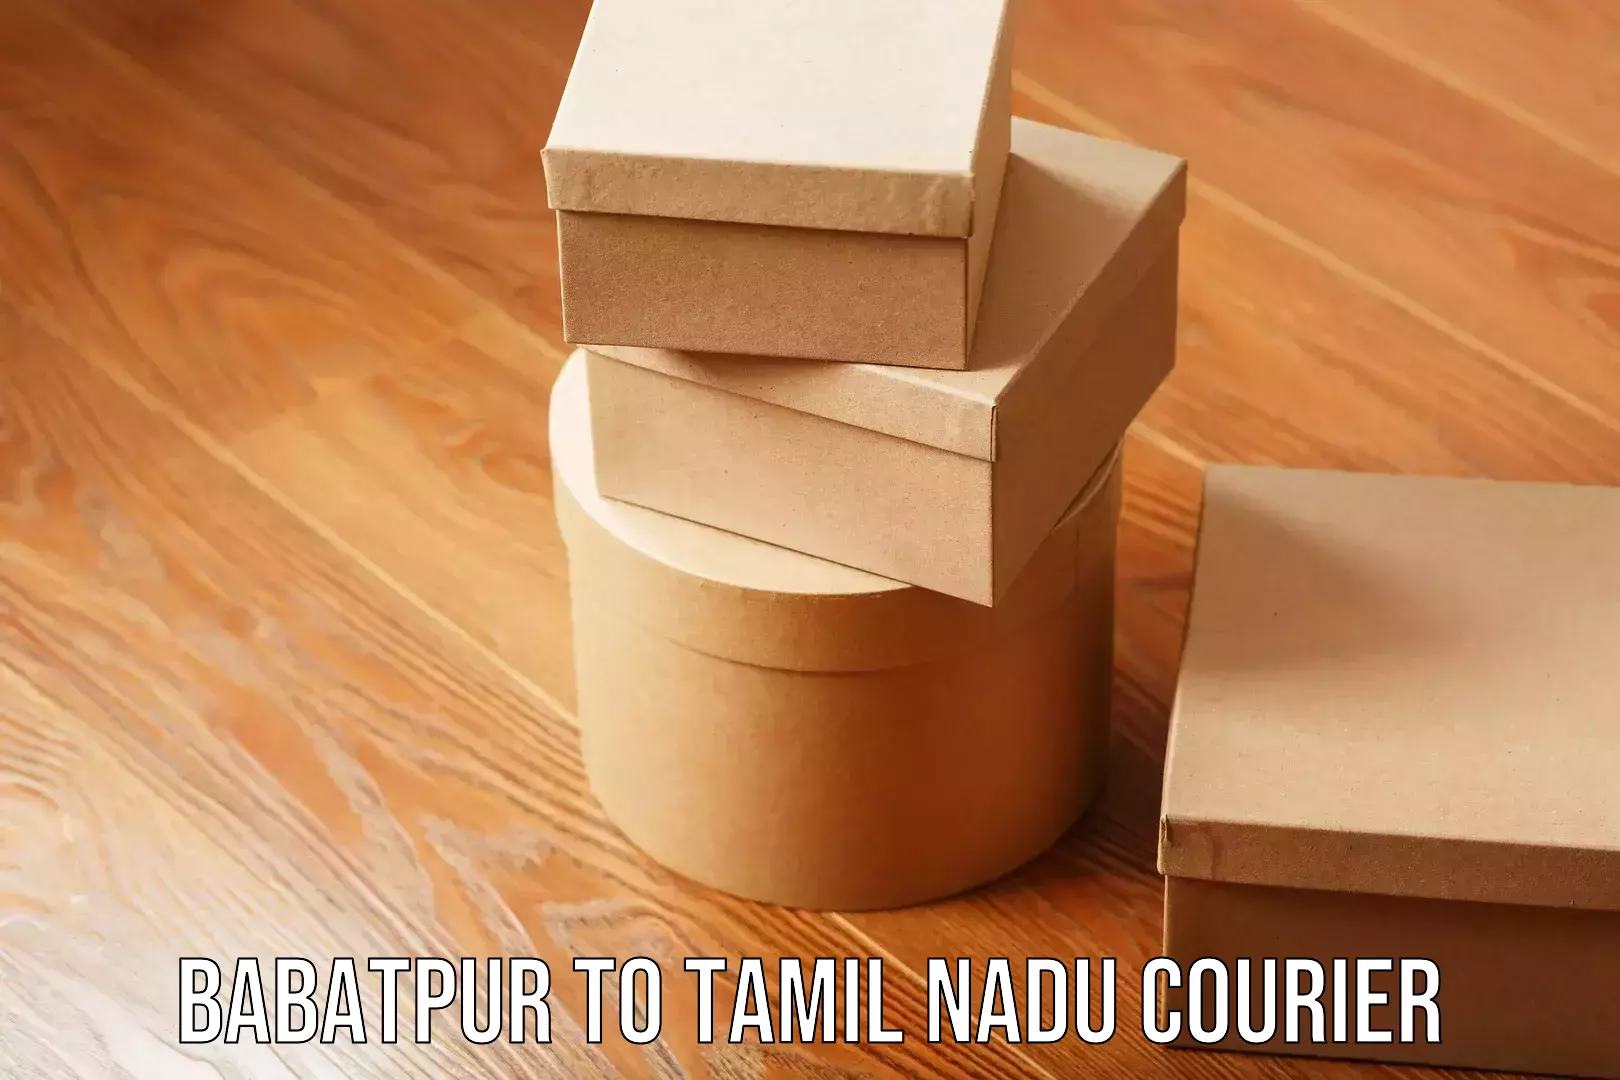 Fast-track shipping solutions Babatpur to Tamil Nadu